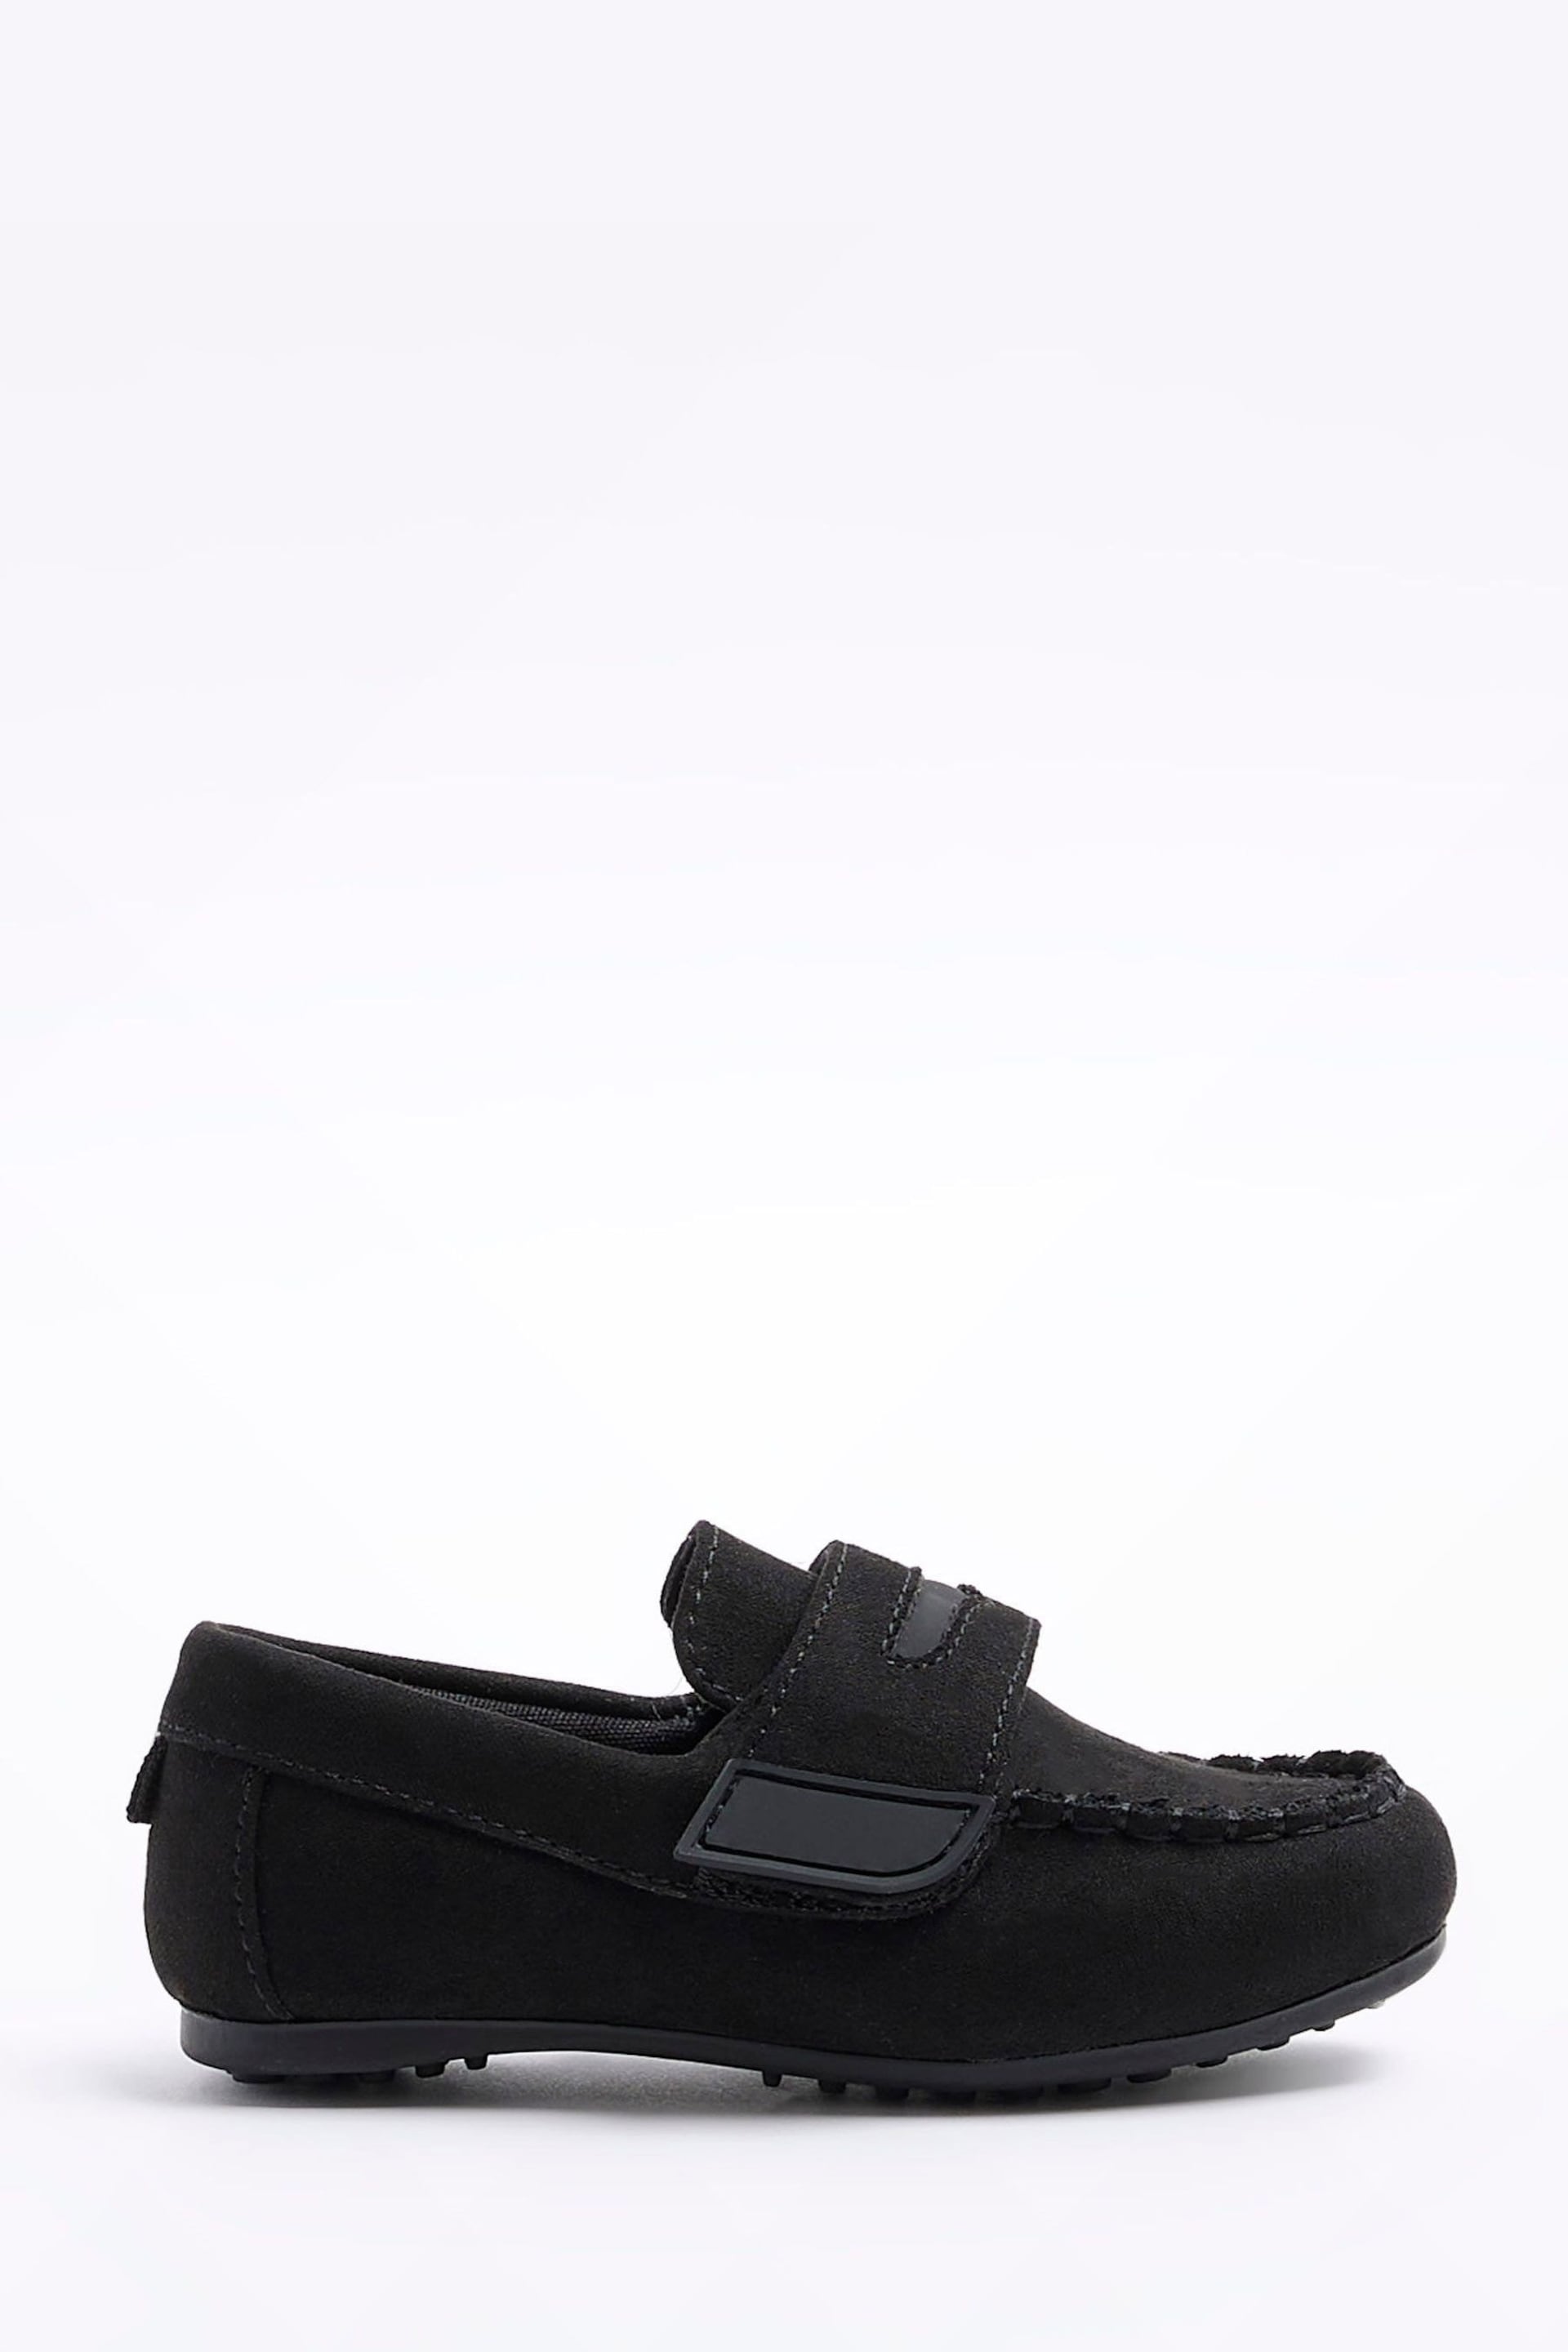 River Island Black Boys Velcro Loafers - Image 1 of 4